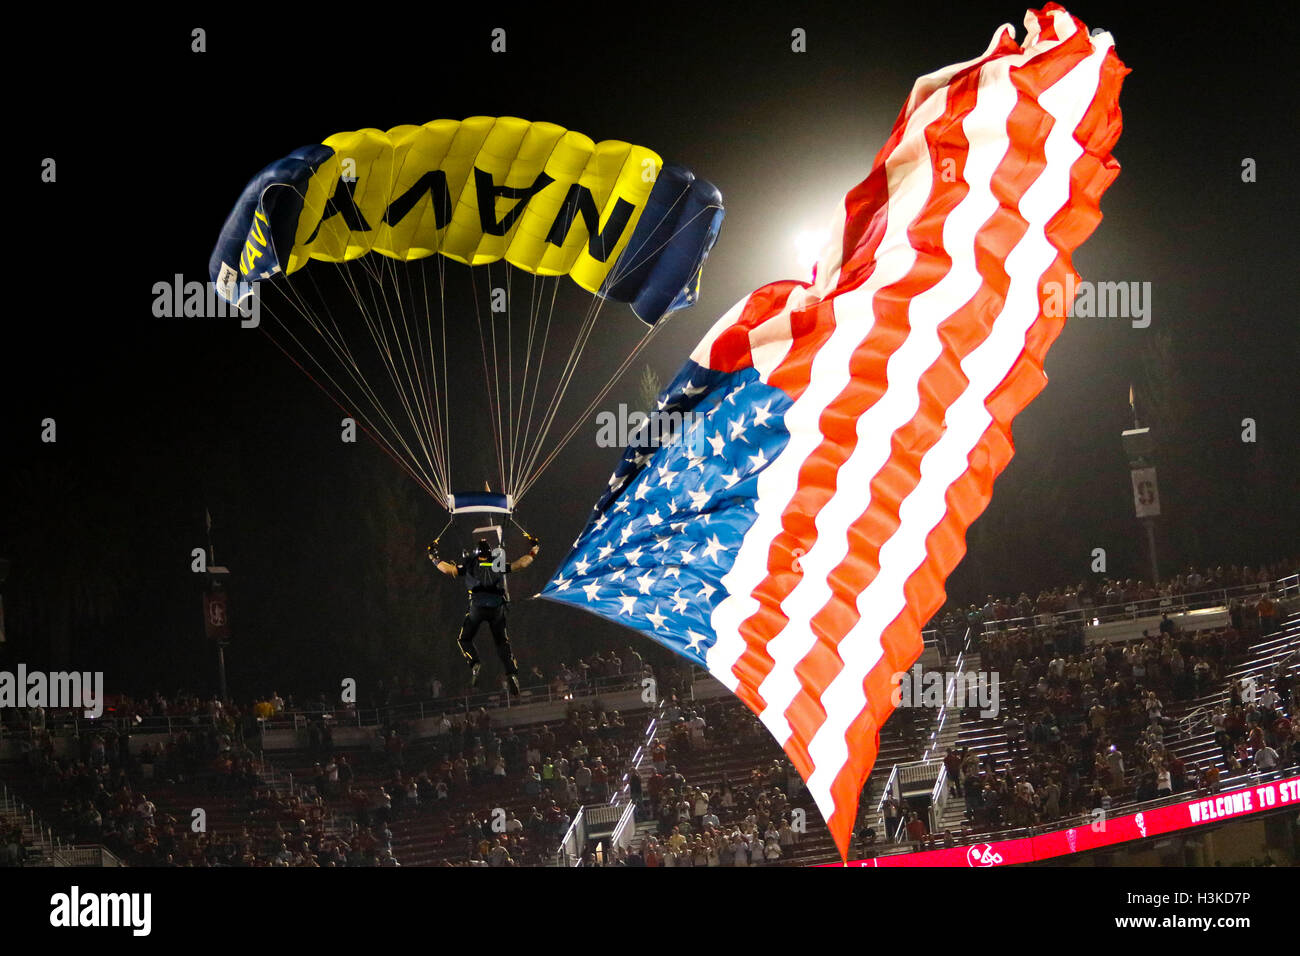 Palo Alto, California, USA. 8th Oct, 2016. A Navy SEAL parachutes into Stanford Stadium prior to football action at Stanford University, featuring the Washington State Cougars visiting the Stanford Cardinal. Washington State won the game, 42-16. © Seth Riskin/ZUMA Wire/Alamy Live News Stock Photo